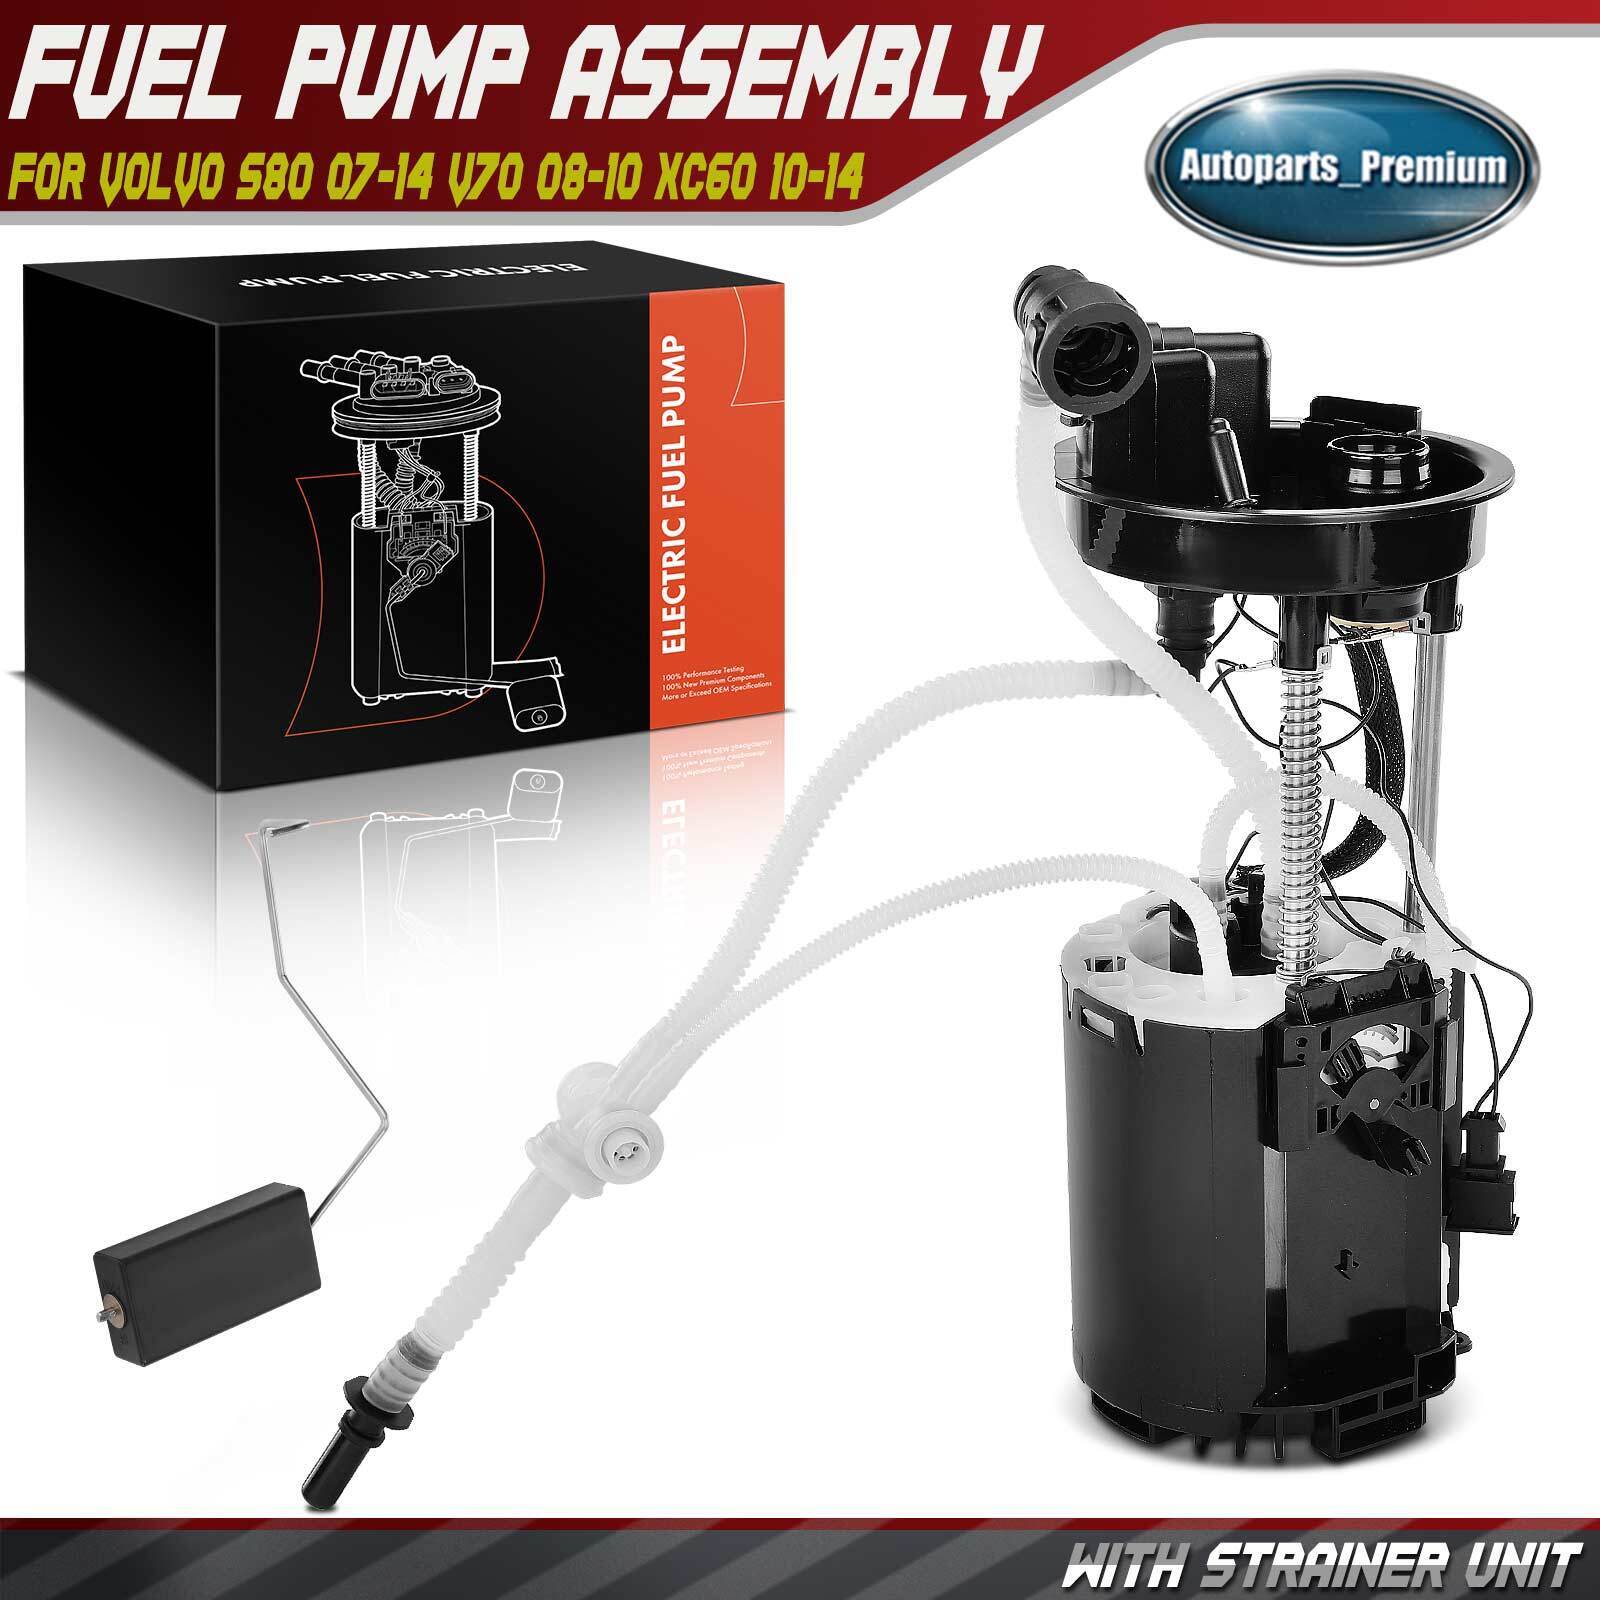 Fuel Pump Assembly for Volvo S80 2007-2014 V70 2008-2010 XC60 10-14 XC70 11-13